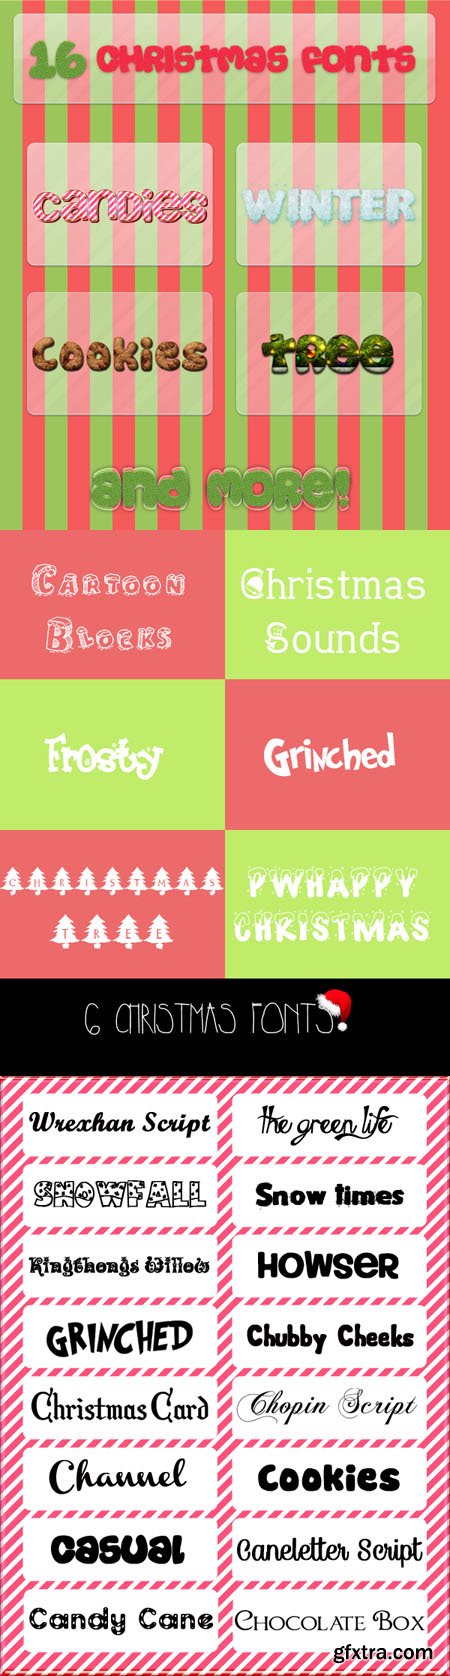 23 Christmas Fonts & Styles